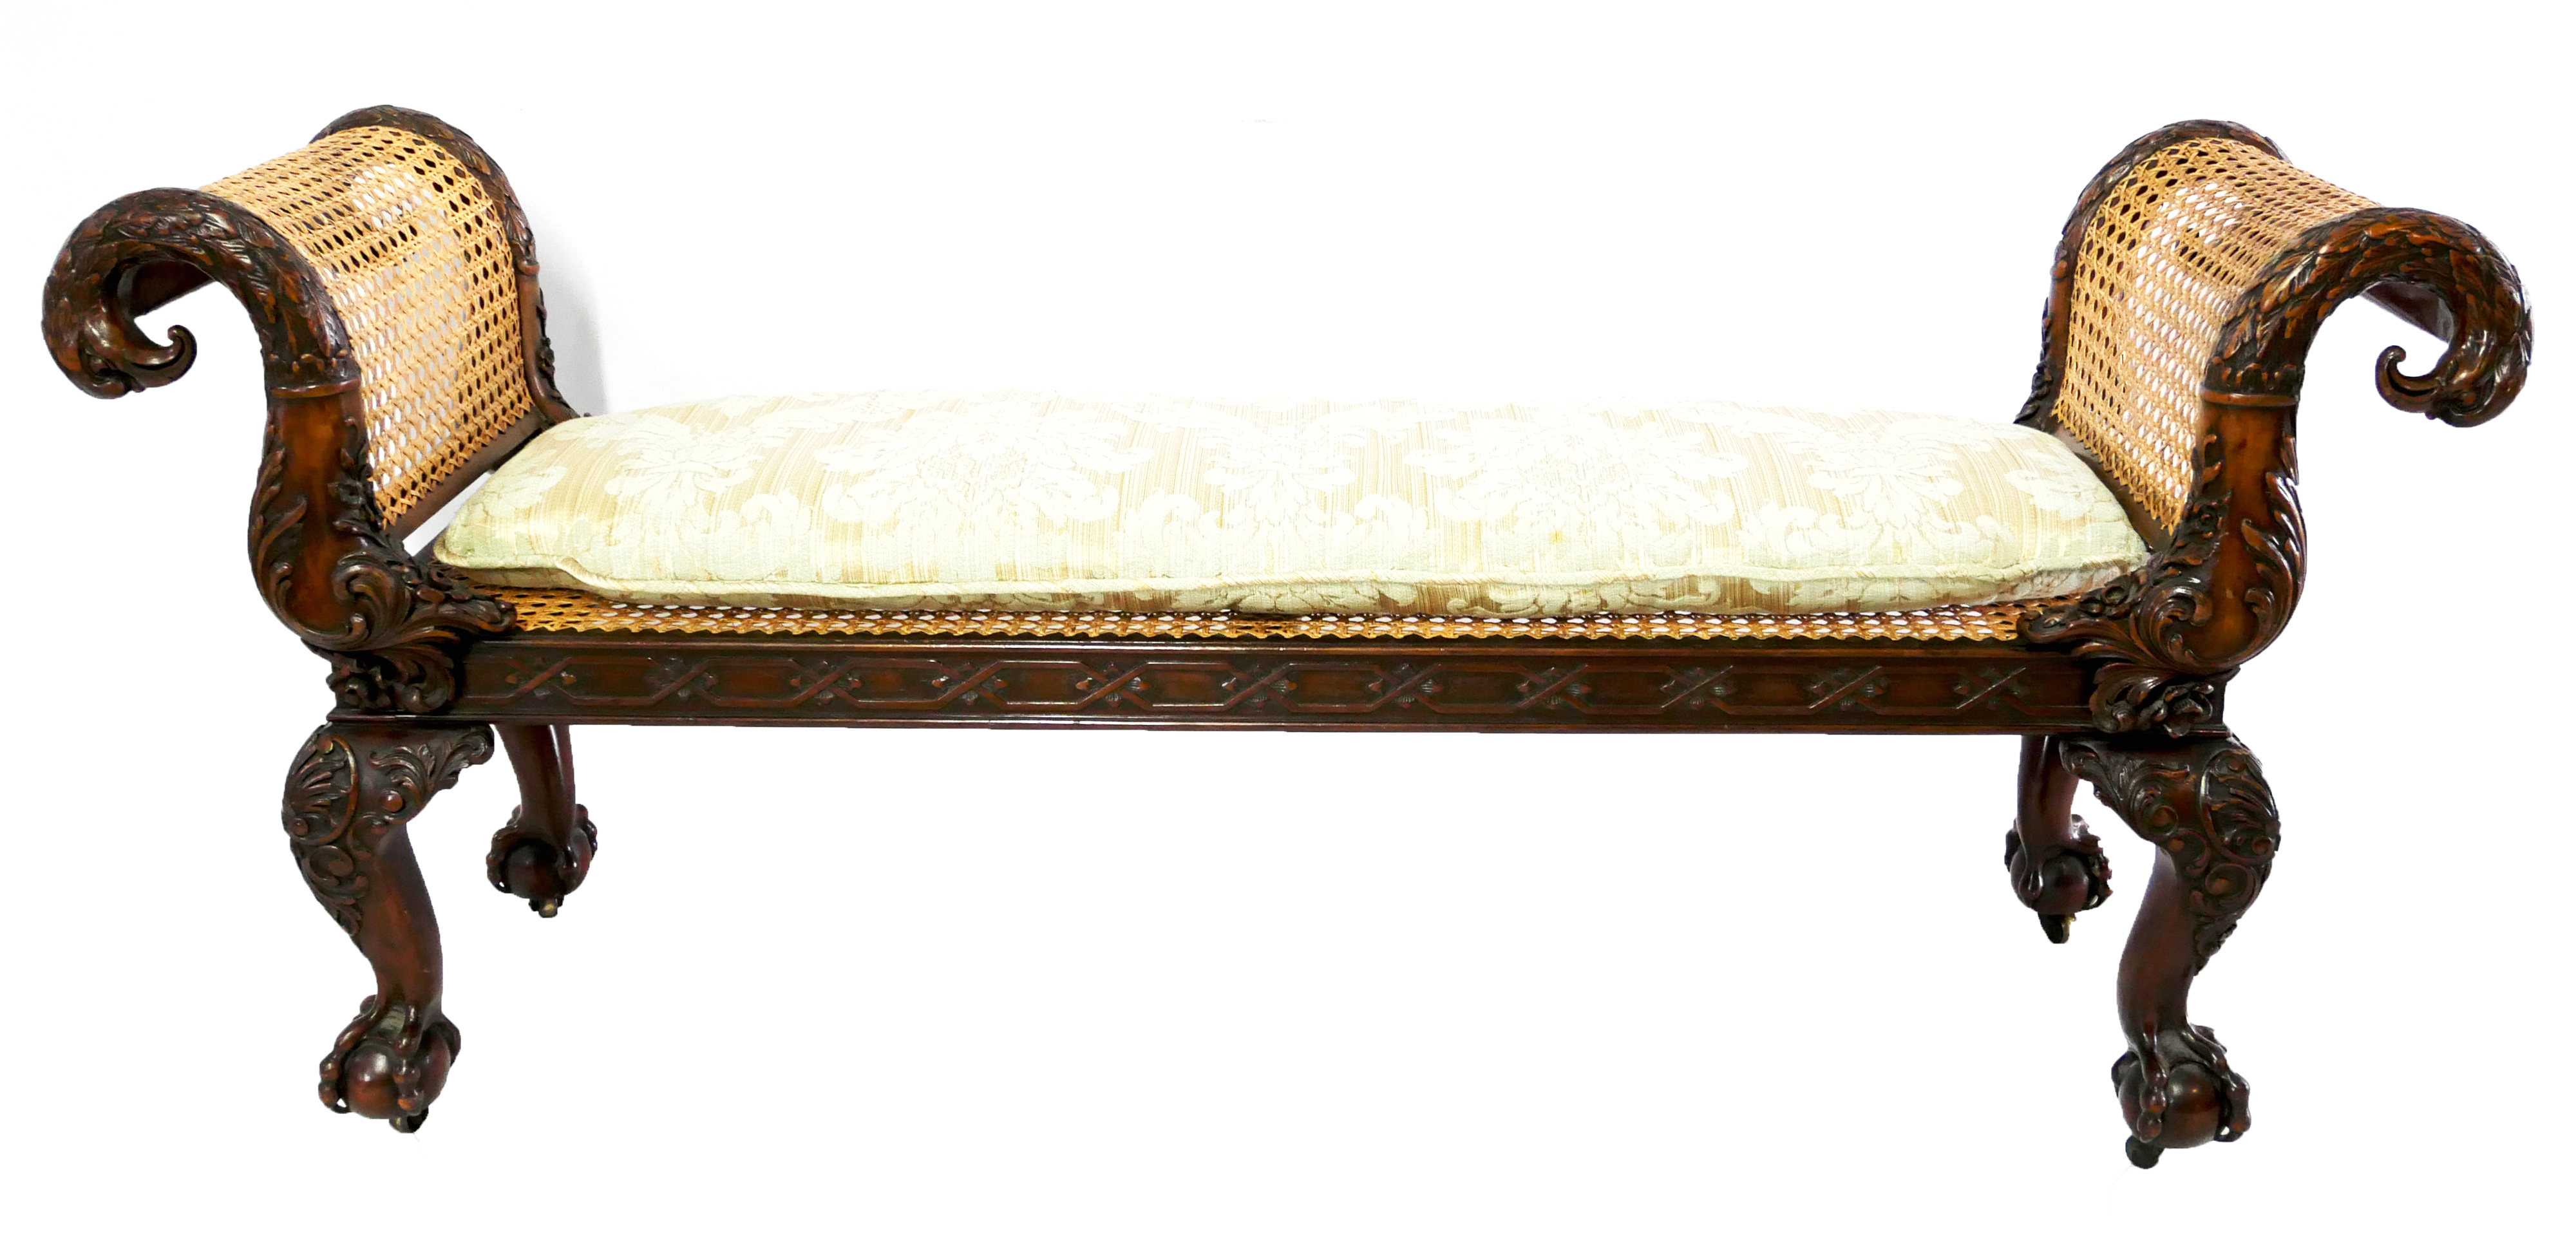 FINE 19TH CENTURY MAHOGANY WINDOW SEAT The ends carved with four scrolling eagle heads with flowers - Image 8 of 8